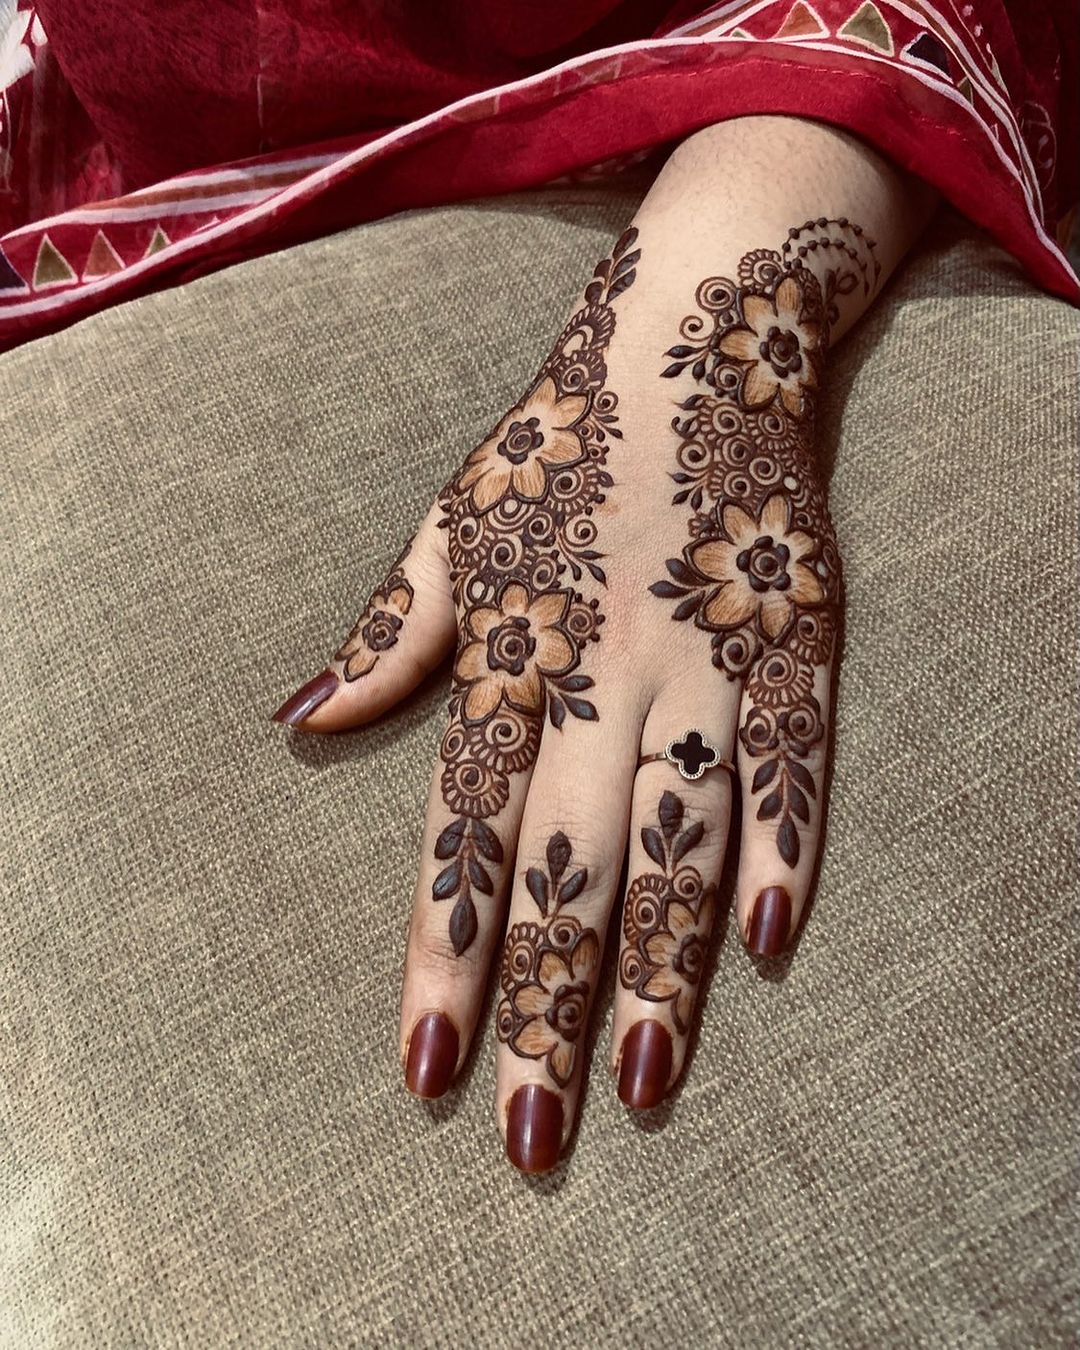 10 Cool Facts About Henna Tattoos Youve Never Heard Before